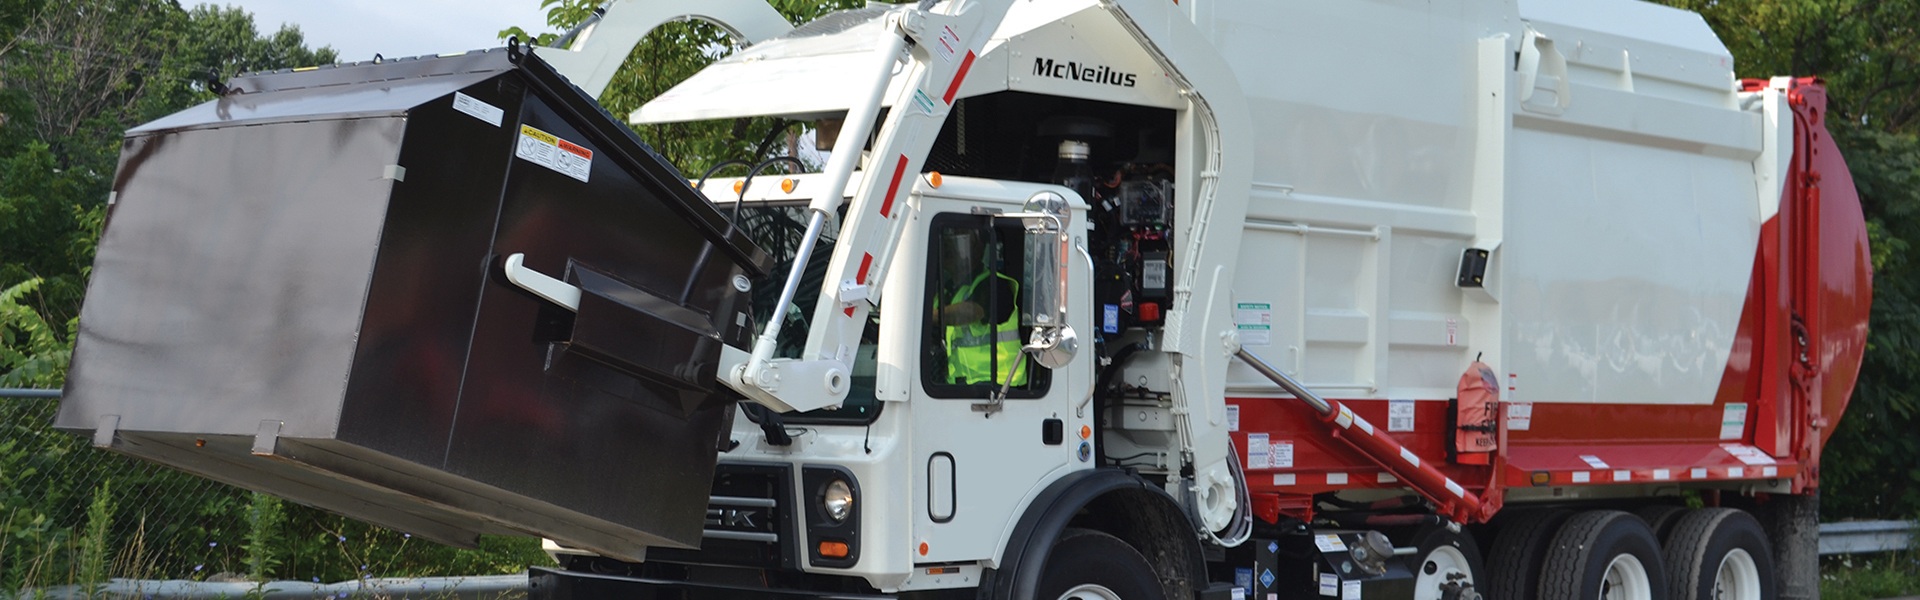 Trash Truck For Trash Pickup Services William Thomas Group